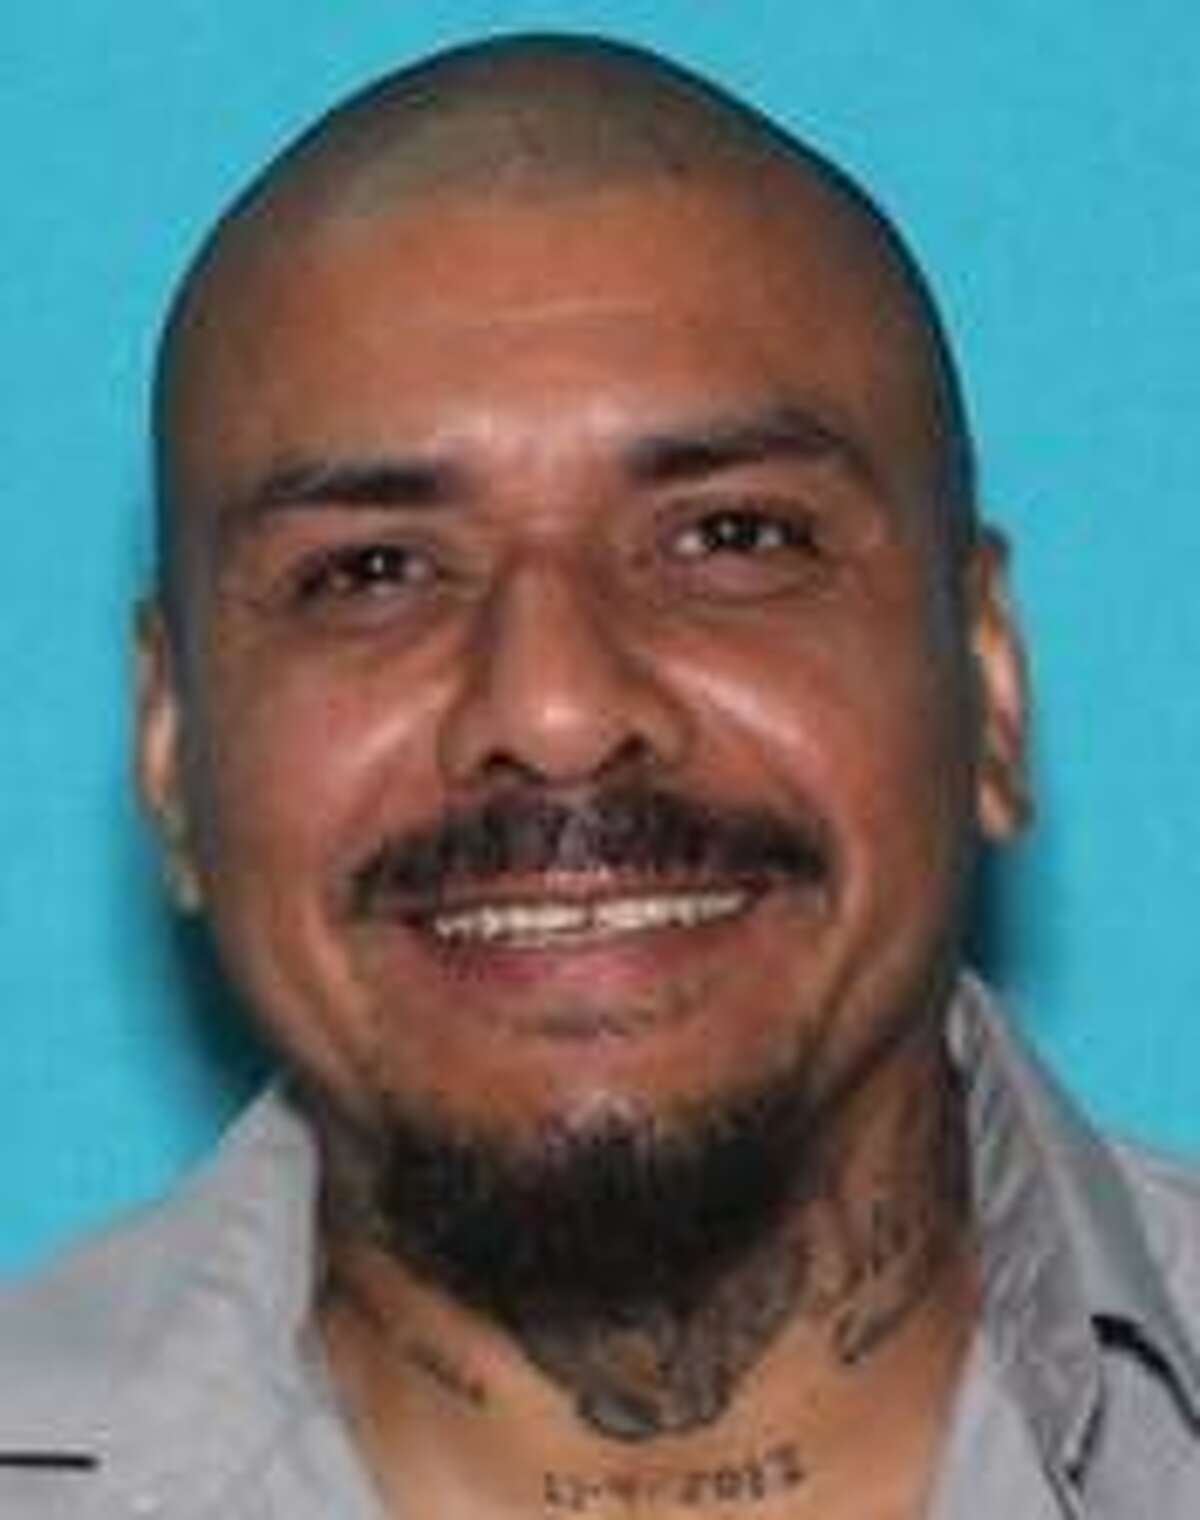 Dps Sex Offender With San Antonio Ties Added To Texas 10